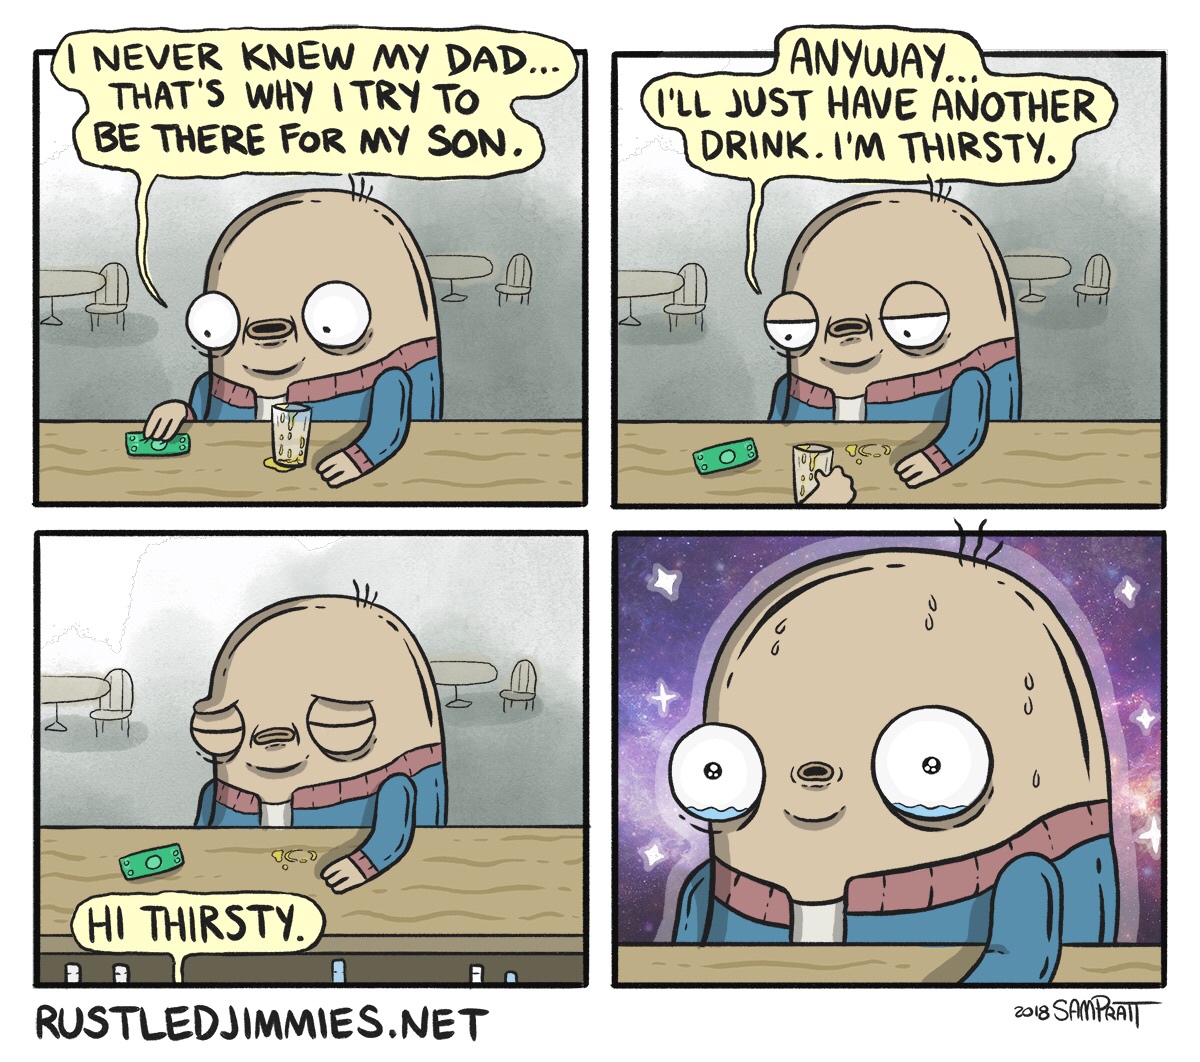 memes - dad joke comic - I Never Knew My Dad... That'S Why I Try To Be There For My Son. Anyway... I'Ll Just Have Another Drink. I'M Thirsty. Oc Hi Thirsty. Rustledjimmies.Net 2018 Sampratt